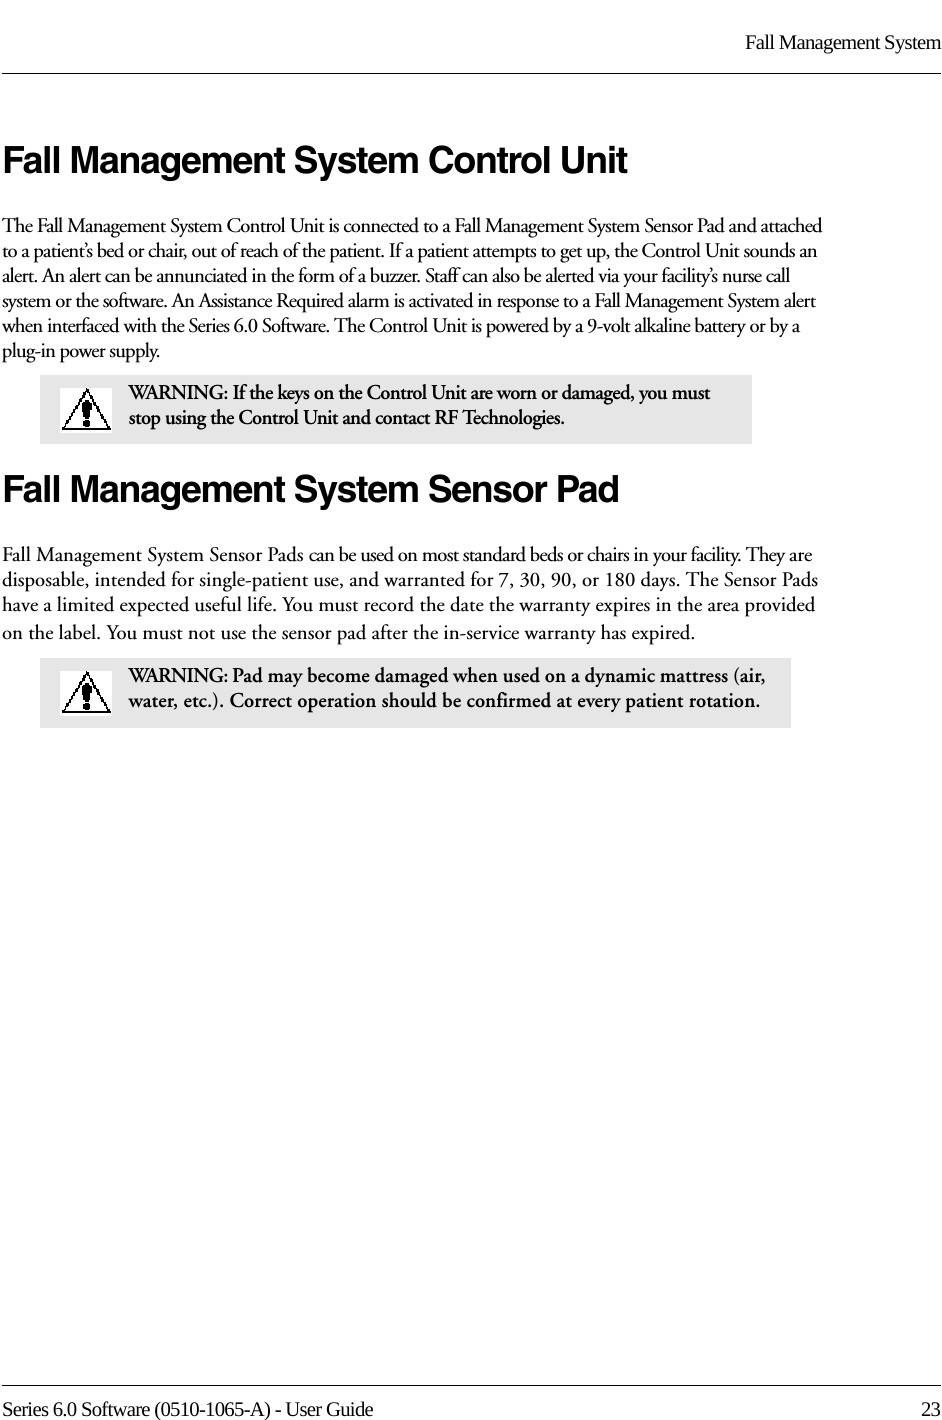 Series 6.0 Software (0510-1065-A) - User Guide  23Fall Management SystemFall Management System Control UnitThe Fall Management System Control Unit is connected to a Fall Management System Sensor Pad and attached to a patient’s bed or chair, out of reach of the patient. If a patient attempts to get up, the Control Unit sounds an alert. An alert can be annunciated in the form of a buzzer. Staff can also be alerted via your facility’s nurse call system or the software. An Assistance Required alarm is activated in response to a Fall Management System alert when interfaced with the Series 6.0 Software. The Control Unit is powered by a 9-volt alkaline battery or by a plug-in power supply.Fall Management System Sensor PadFall Management System Sensor Pads can be used on most standard beds or chairs in your facility. They are disposable, intended for single-patient use, and warranted for 7, 30, 90, or 180 days. The Sensor Pads have a limited expected useful life. You must record the date the warranty expires in the area provided on the label. You must not use the sensor pad after the in-service warranty has expired.WARNING: If the keys on the Control Unit are worn or damaged, you must stop using the Control Unit and contact RF Technologies.WARNING: Pad may become damaged when used on a dynamic mattress (air, water, etc.). Correct operation should be confirmed at every patient rotation.